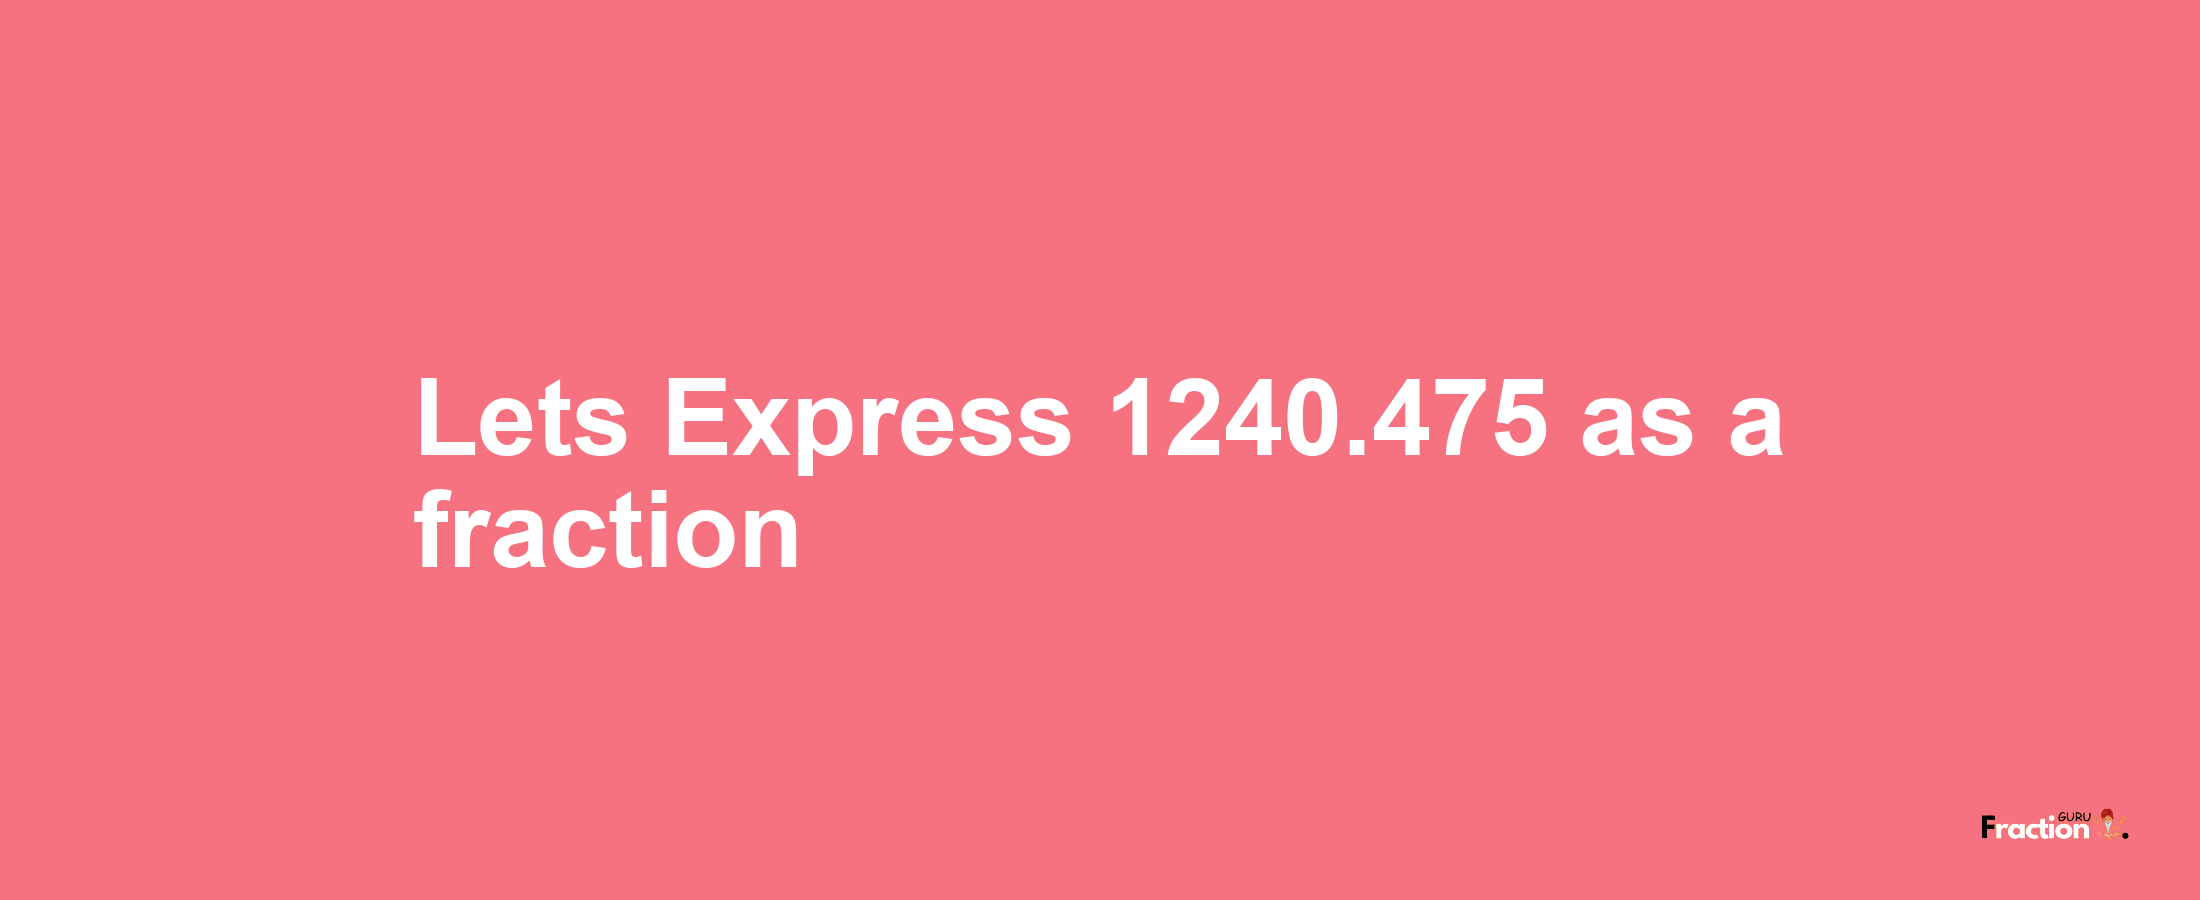 Lets Express 1240.475 as afraction